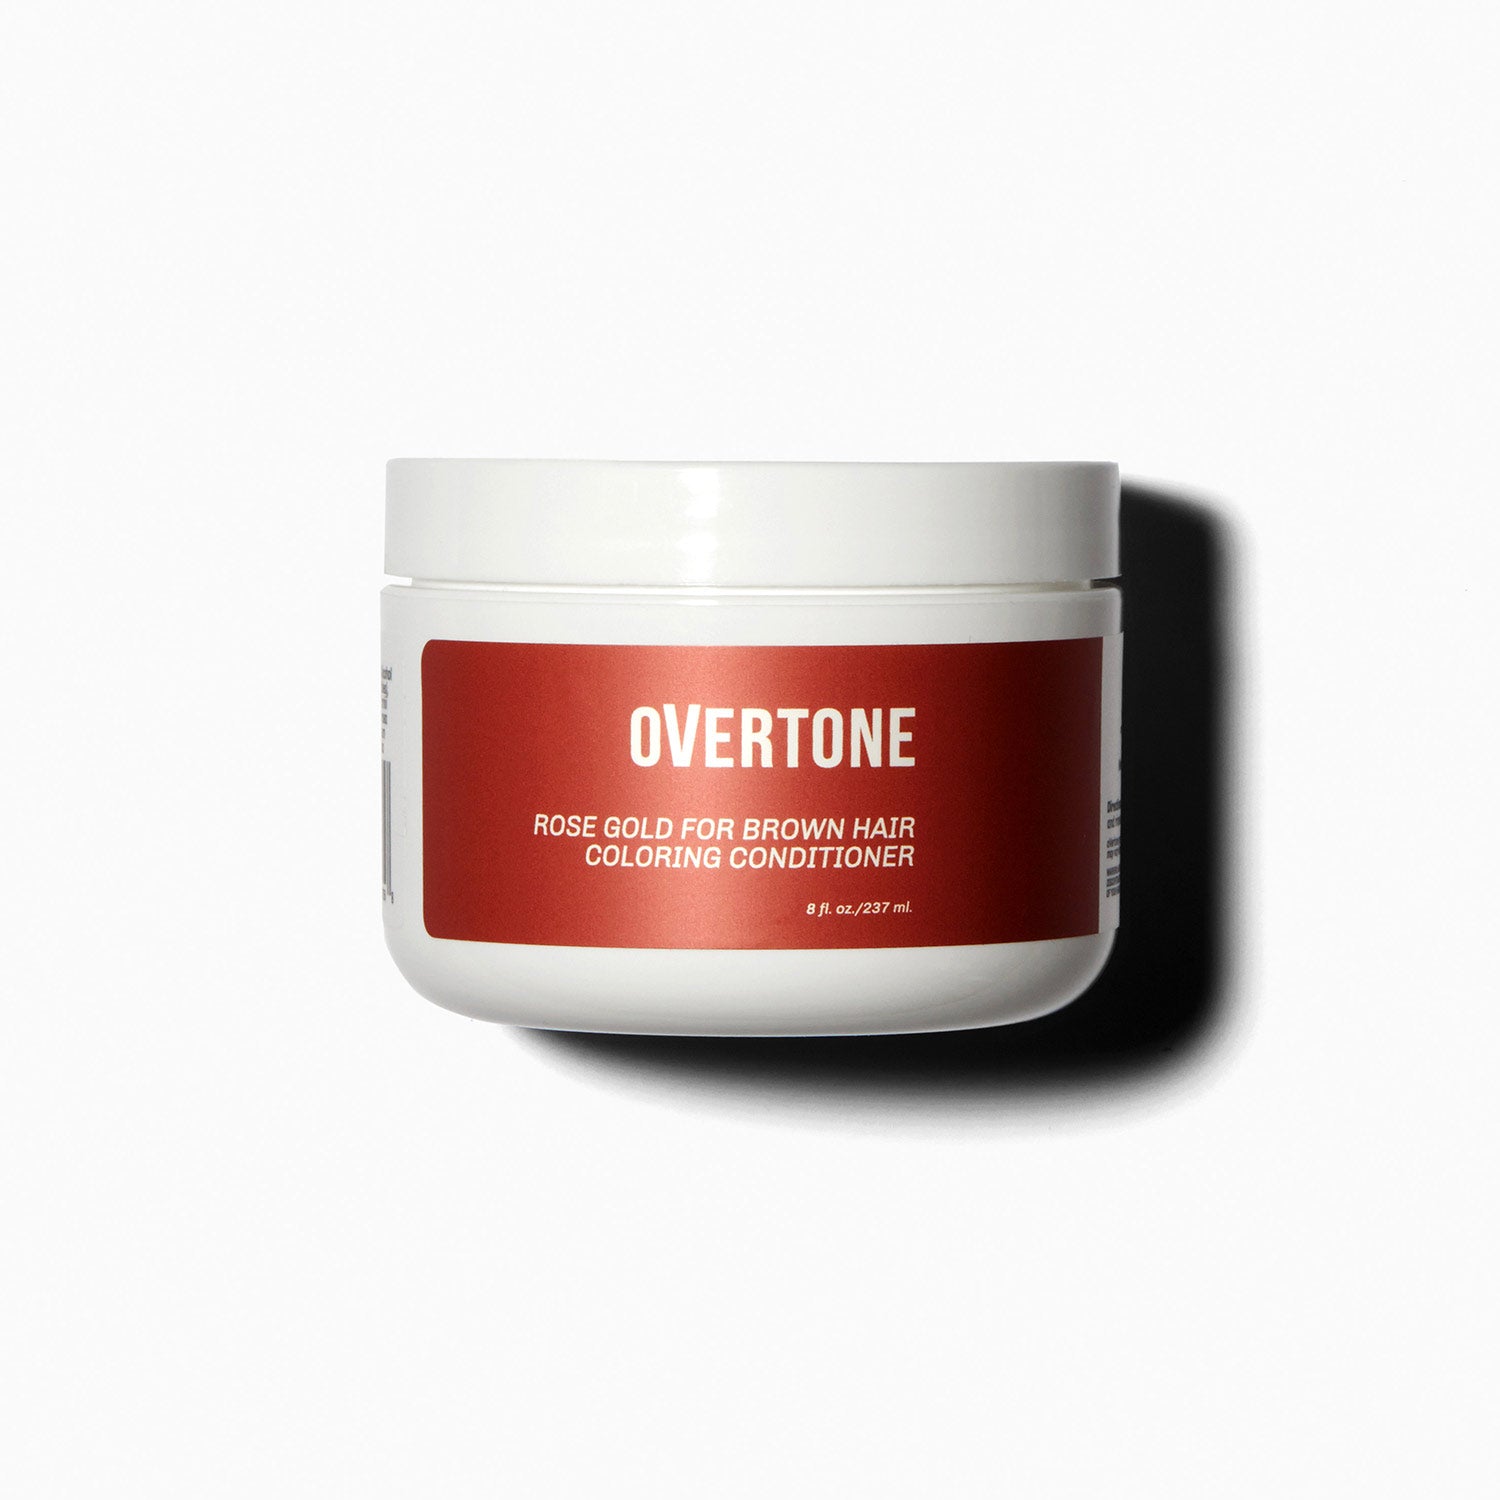 oVertone Rose Gold for Brown Hair Coloring Conditioner